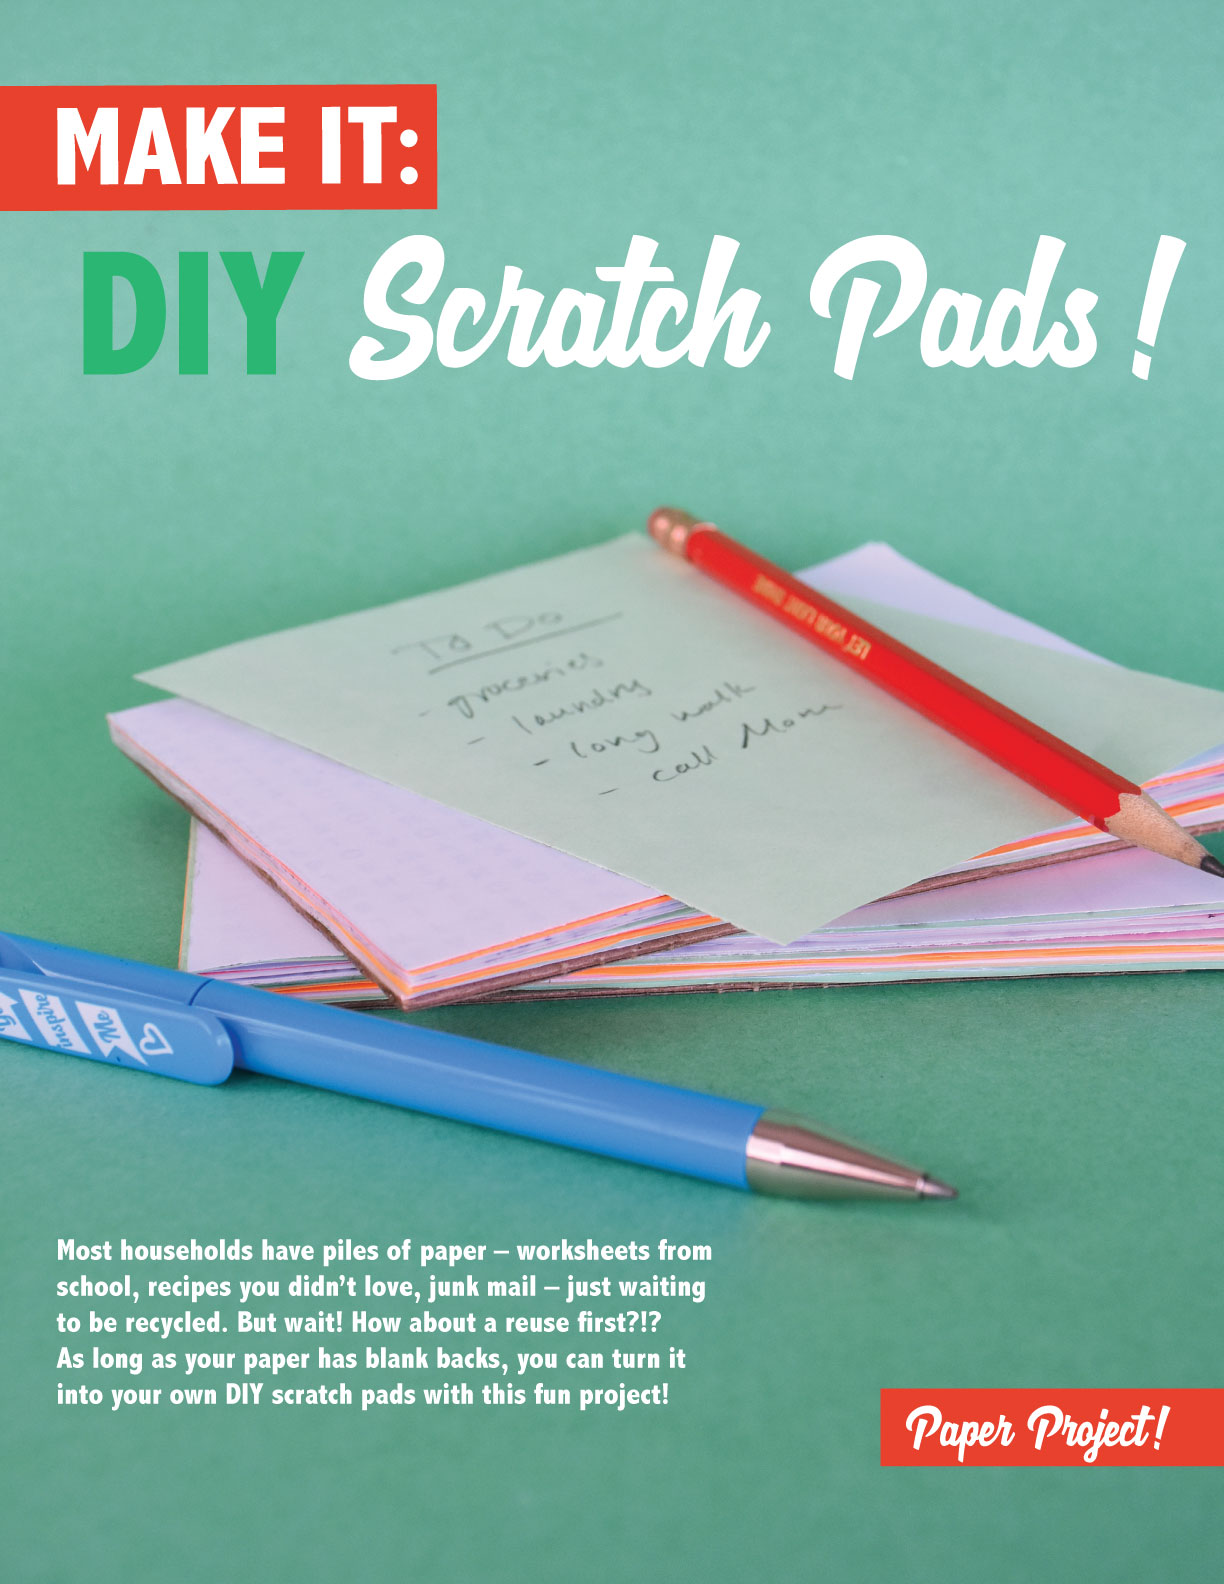 Learn how to make DIY scratch pads!